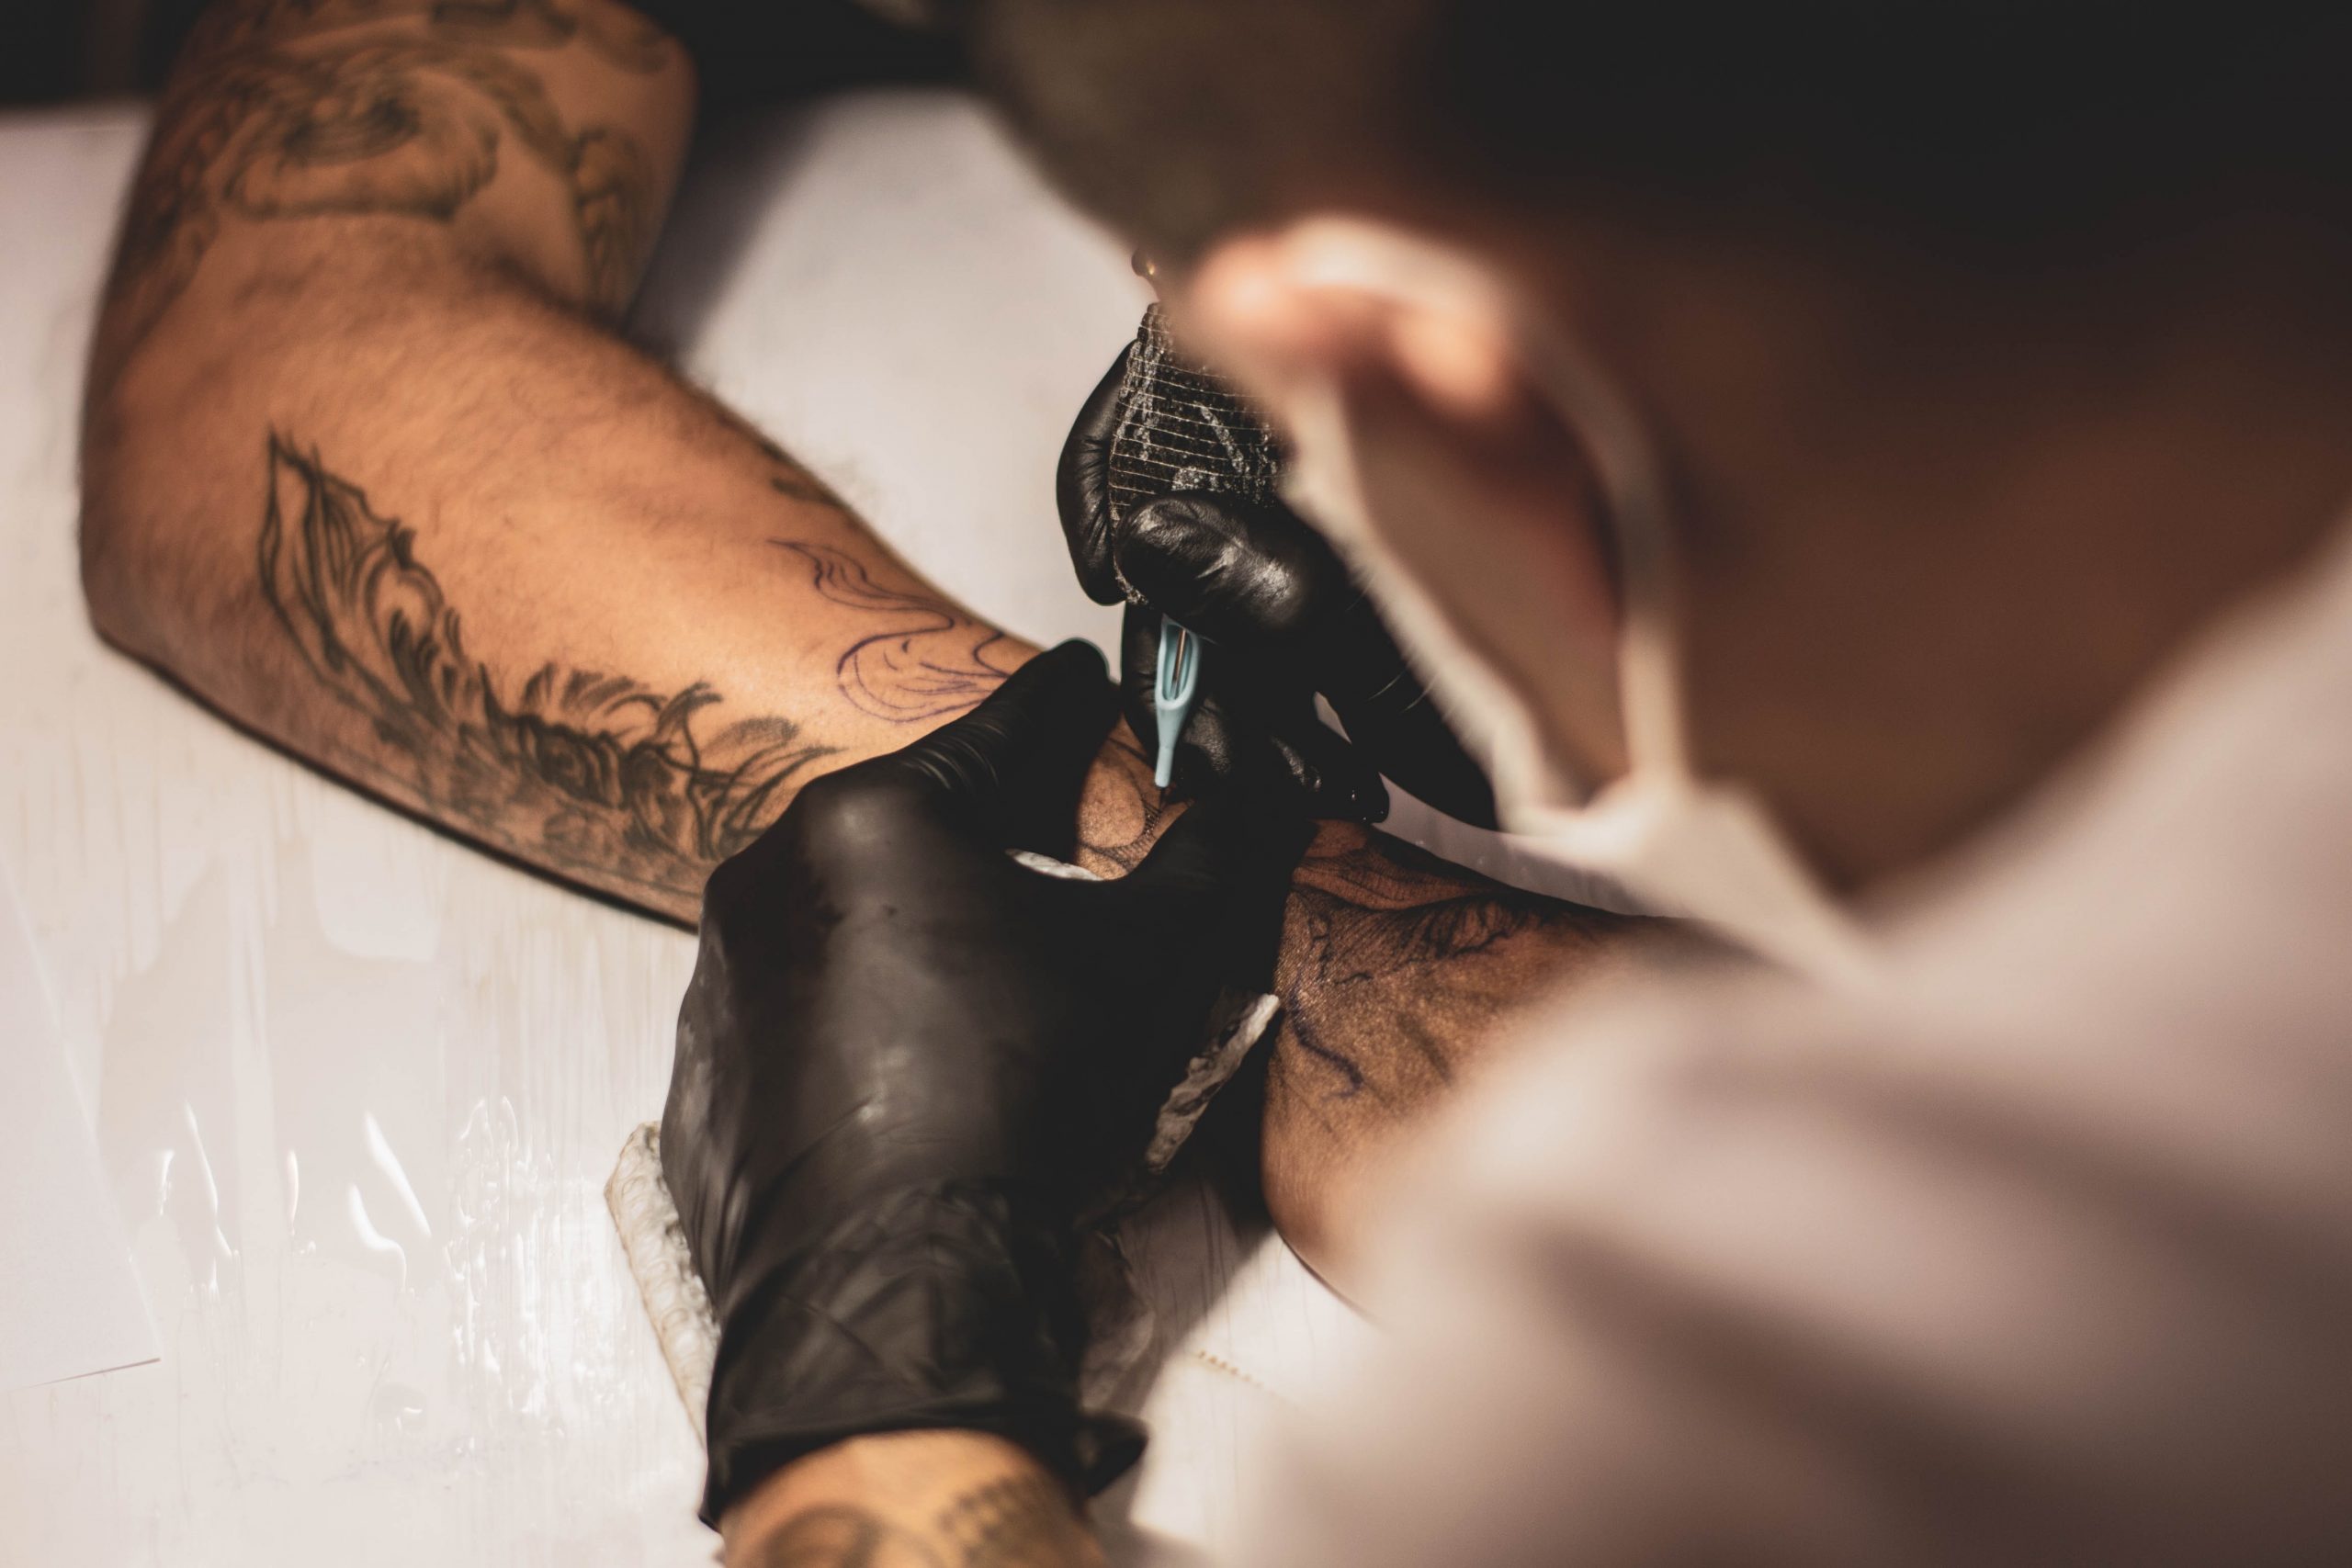 Painless Tattoo Numbing Cream  Lasts 6-8 Hours Maximum Strength Numbing Cream Tattoo  Best Tattoo Numbing Cream  Multipurpose Numbing Cream for Wax